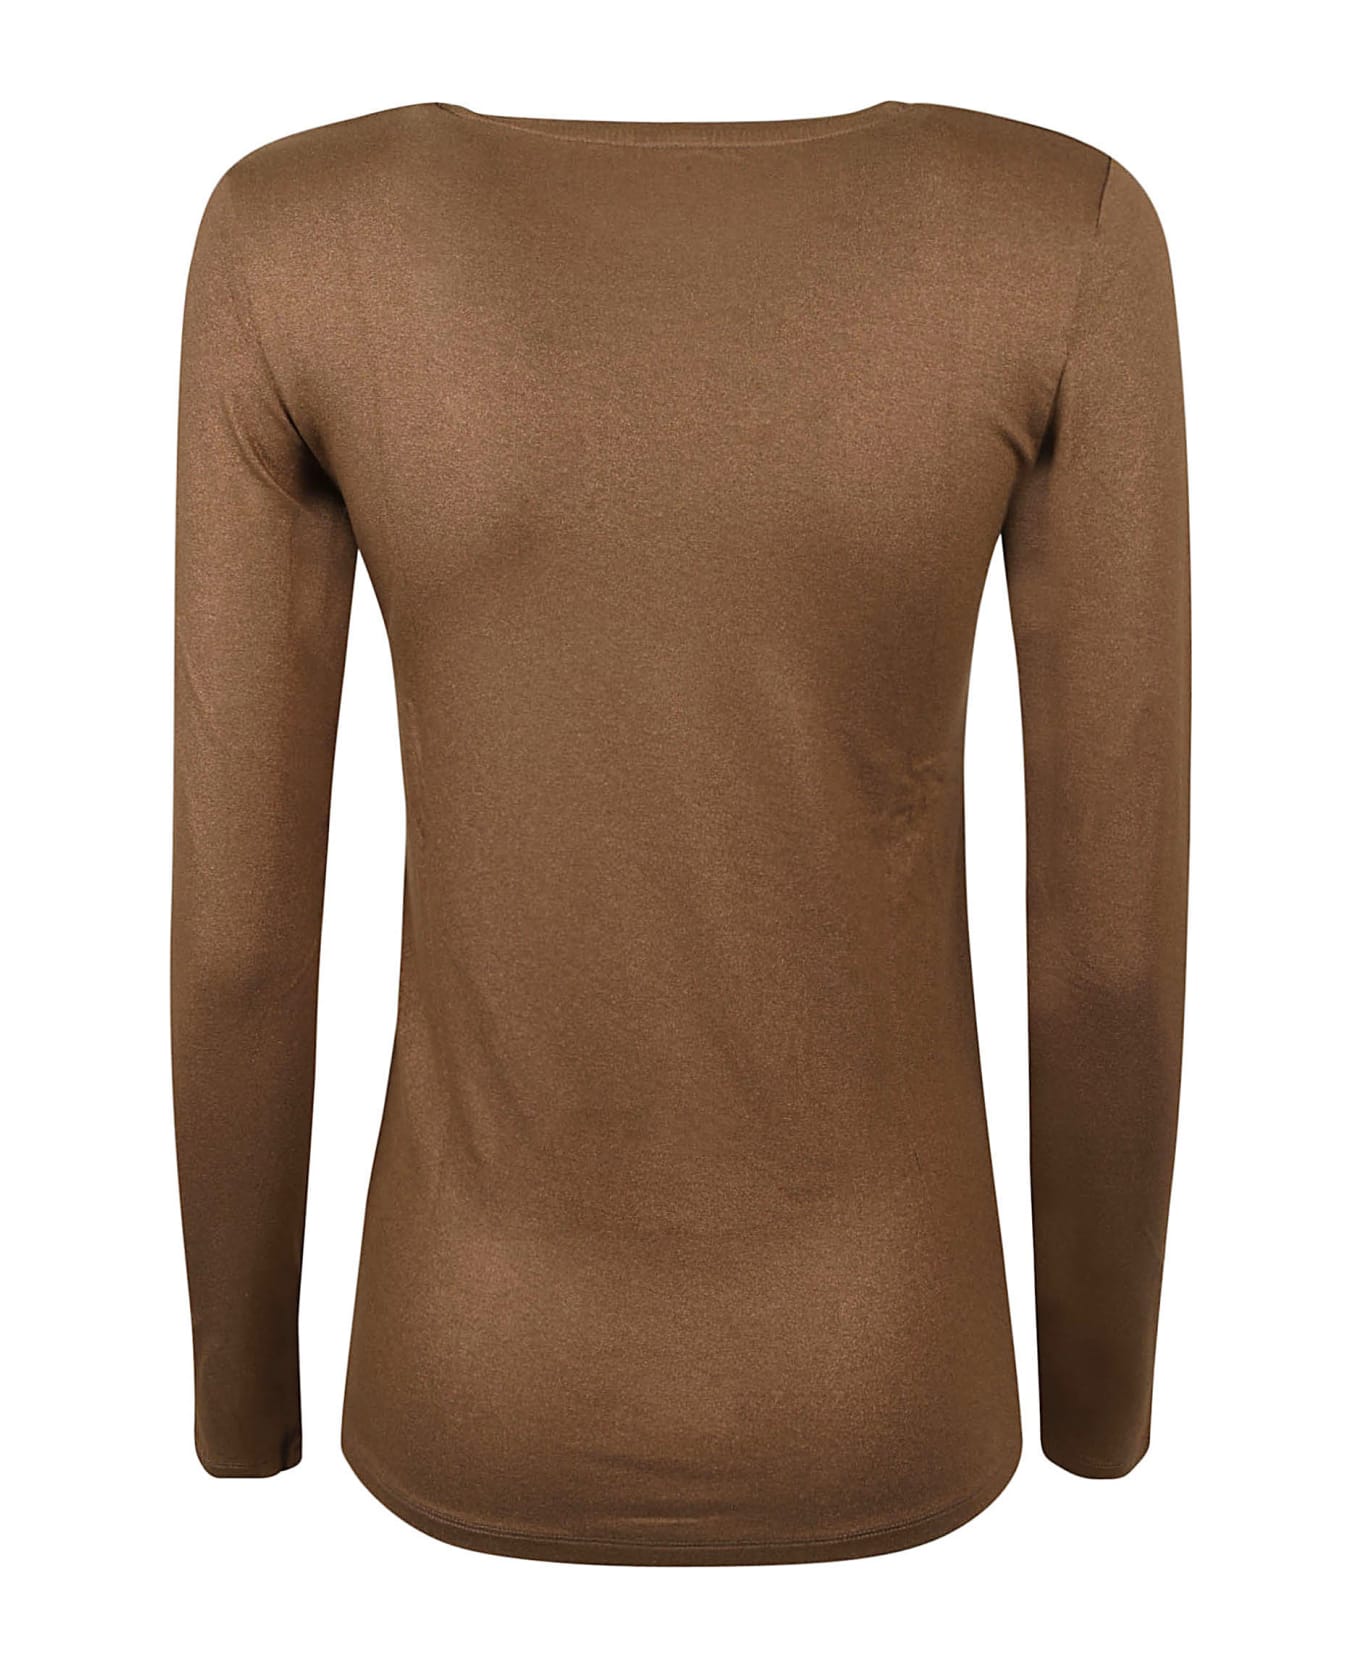 Majestic Filatures Majestic T-shirts And Polos Camel - Camel